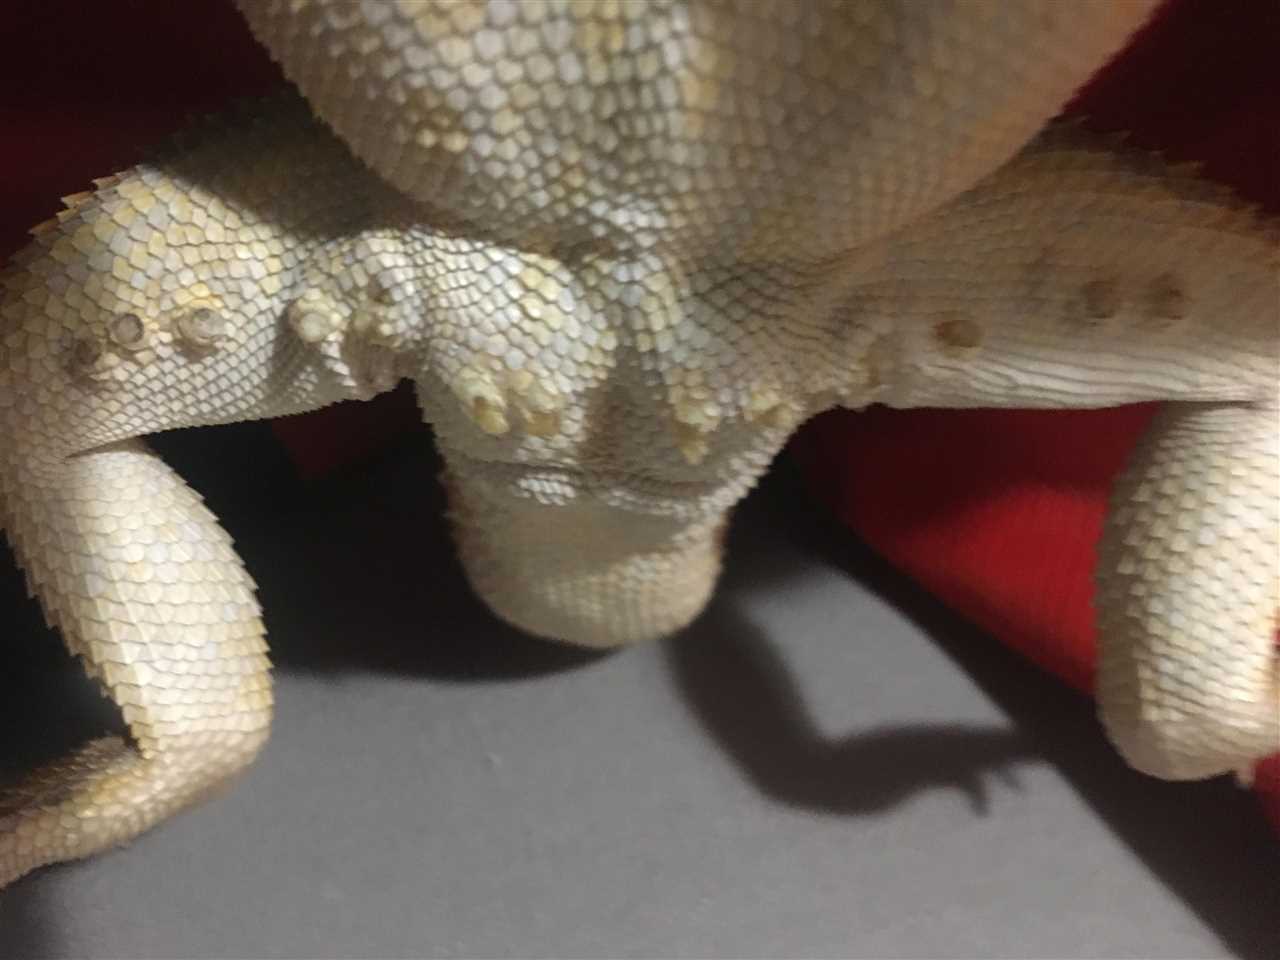 Before and after healthy bearded dragon femoral pores